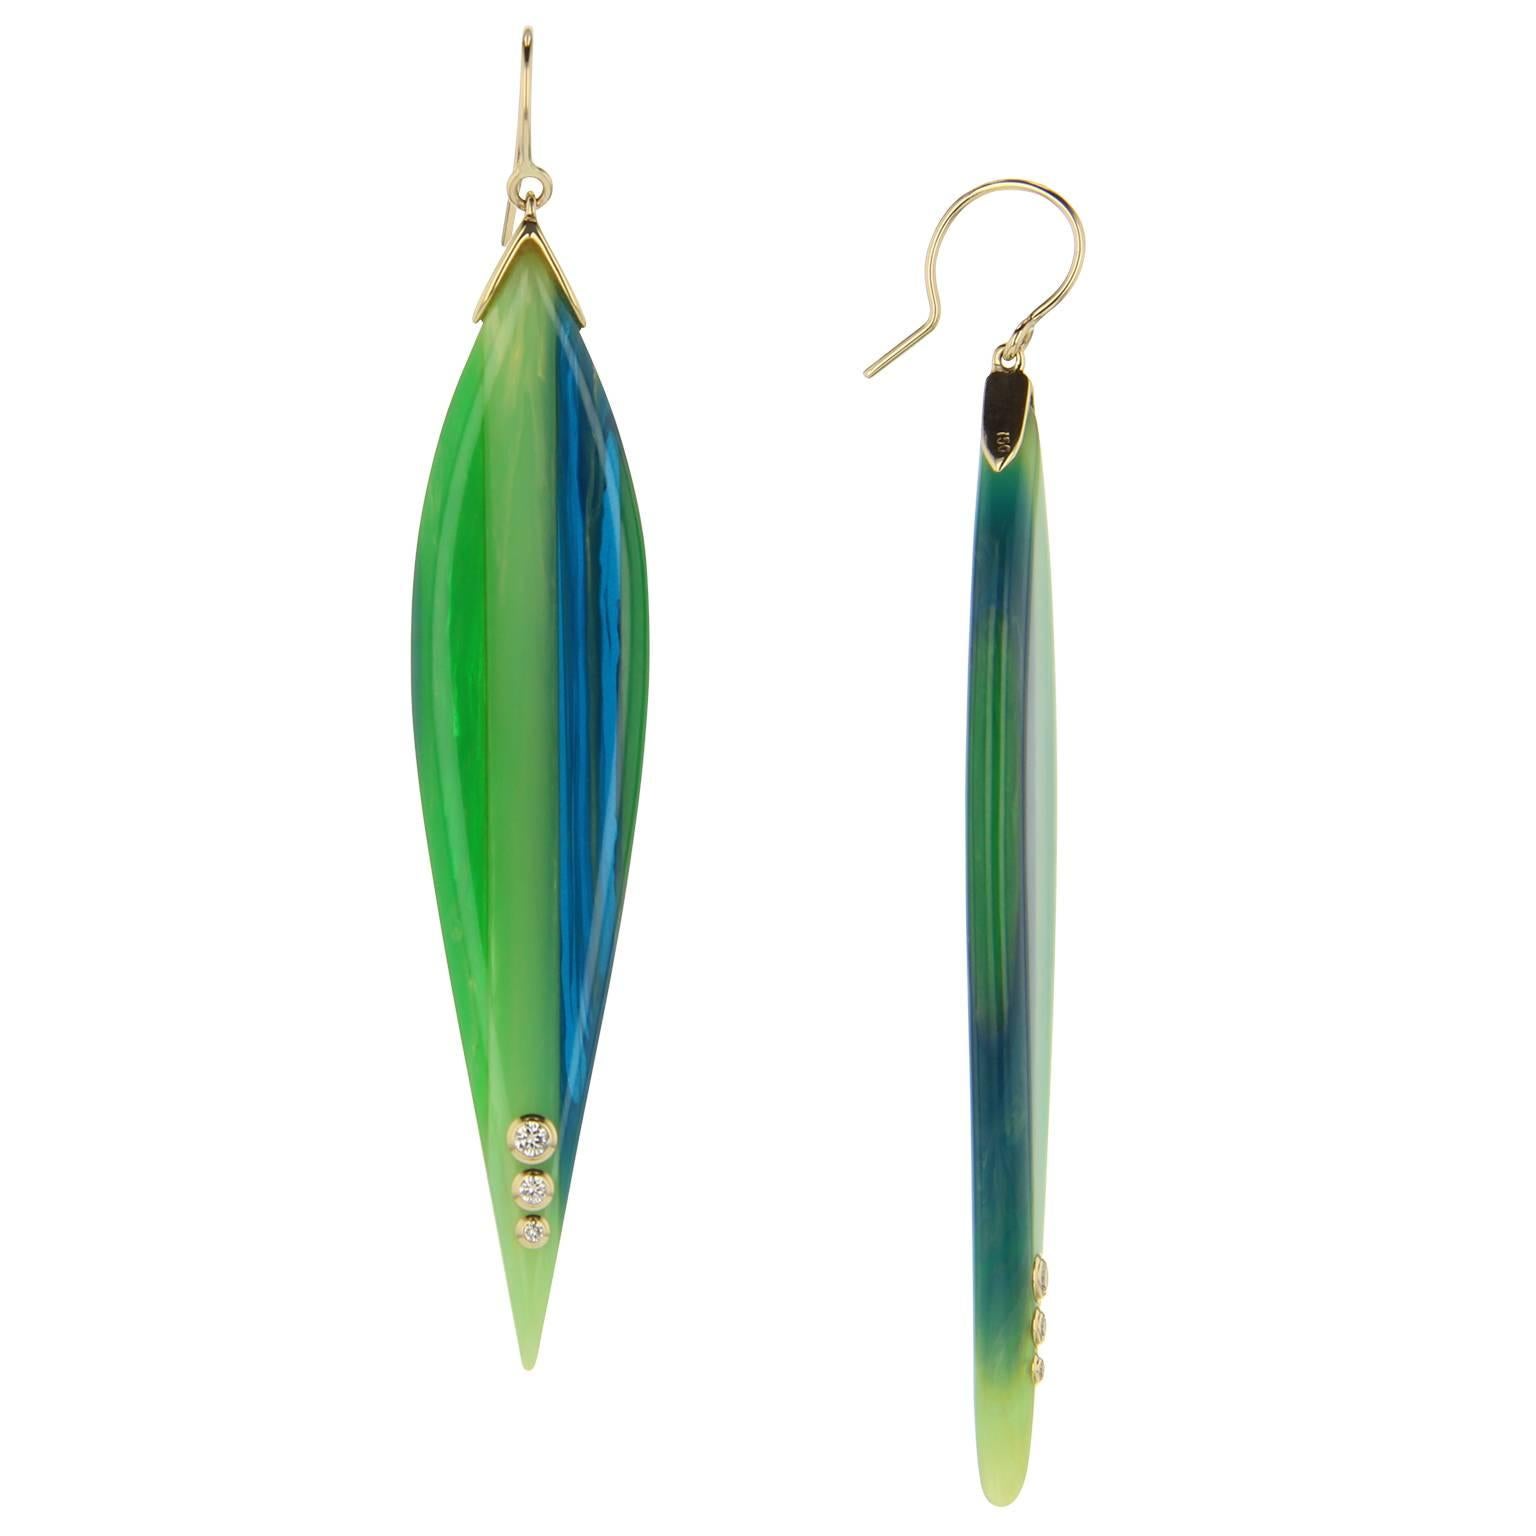 These Mark Davis elongated and inverted teardrop earrings are handcrafted using laminated green and blue vintage bakelite.  Tipped at the bottom with a row of graduated fine diamonds bezel-set in 18k yellow. They are exceptionally light on the ear